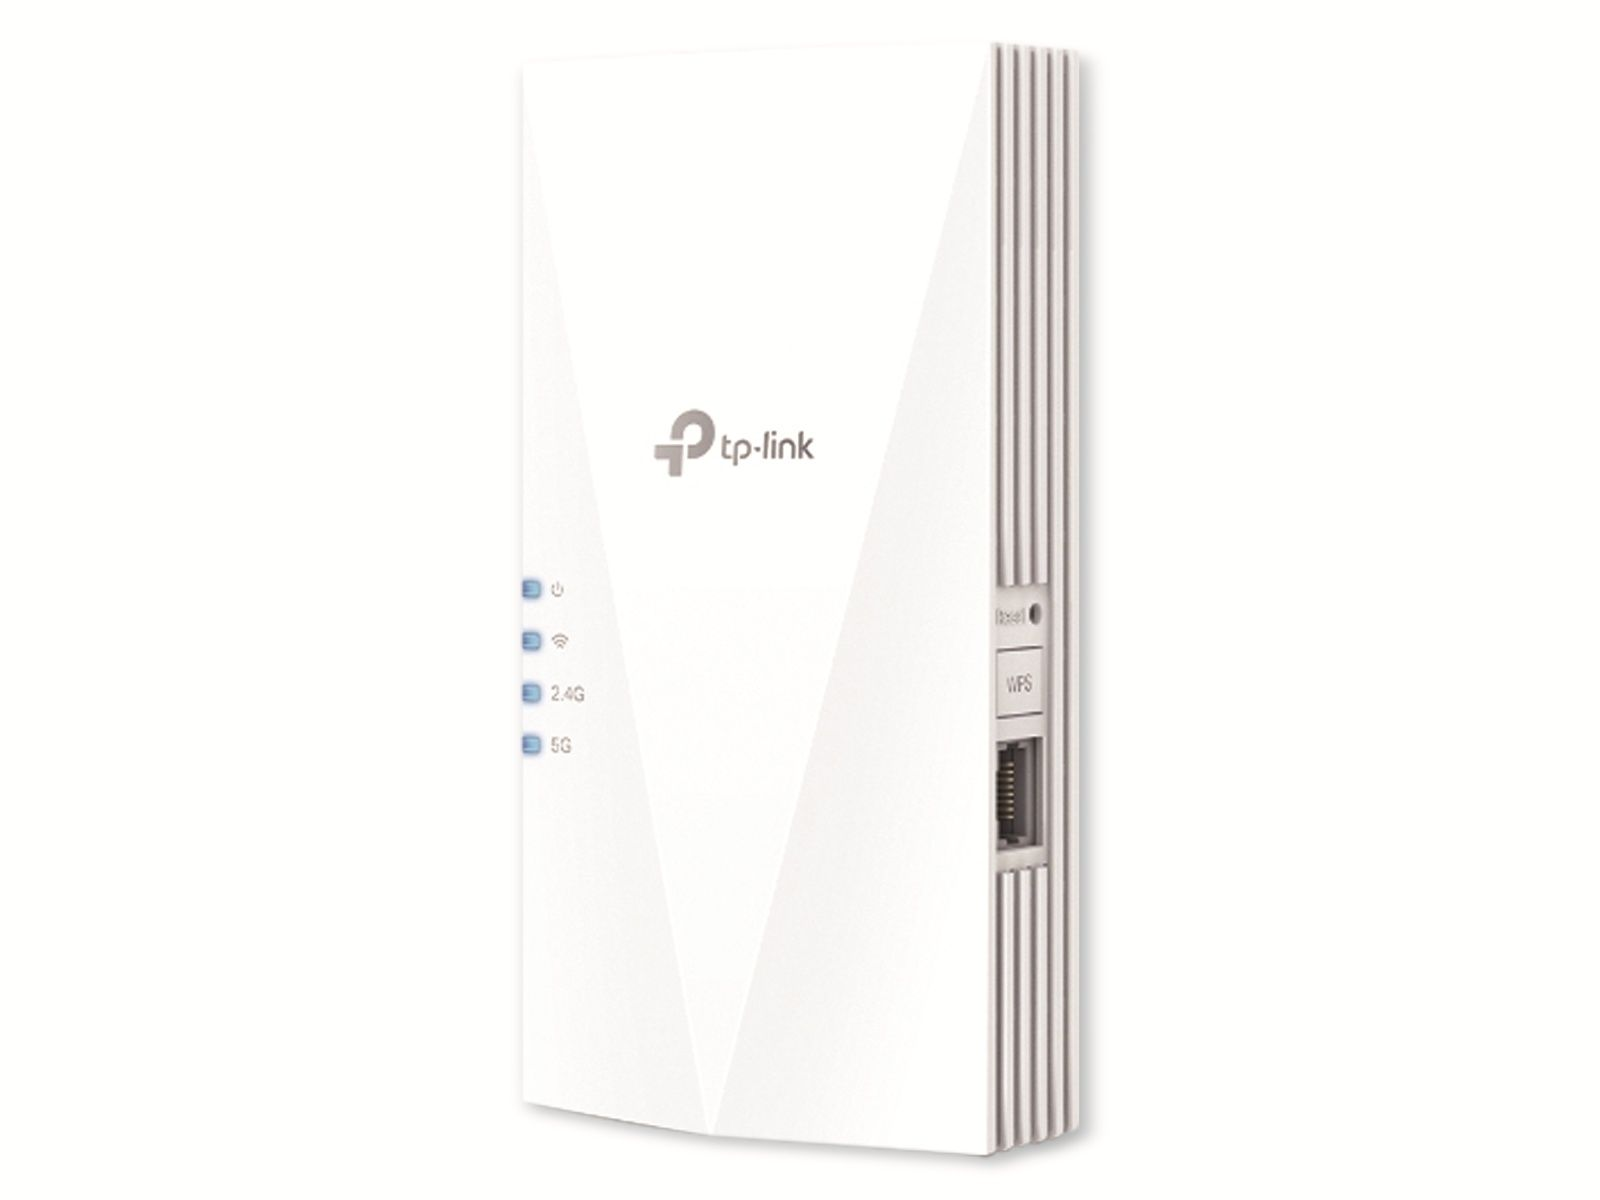 6 Repeater Mbit/s RE600X, TP-LINK 1201 TP-LINK Point Access WiFi AX1800,